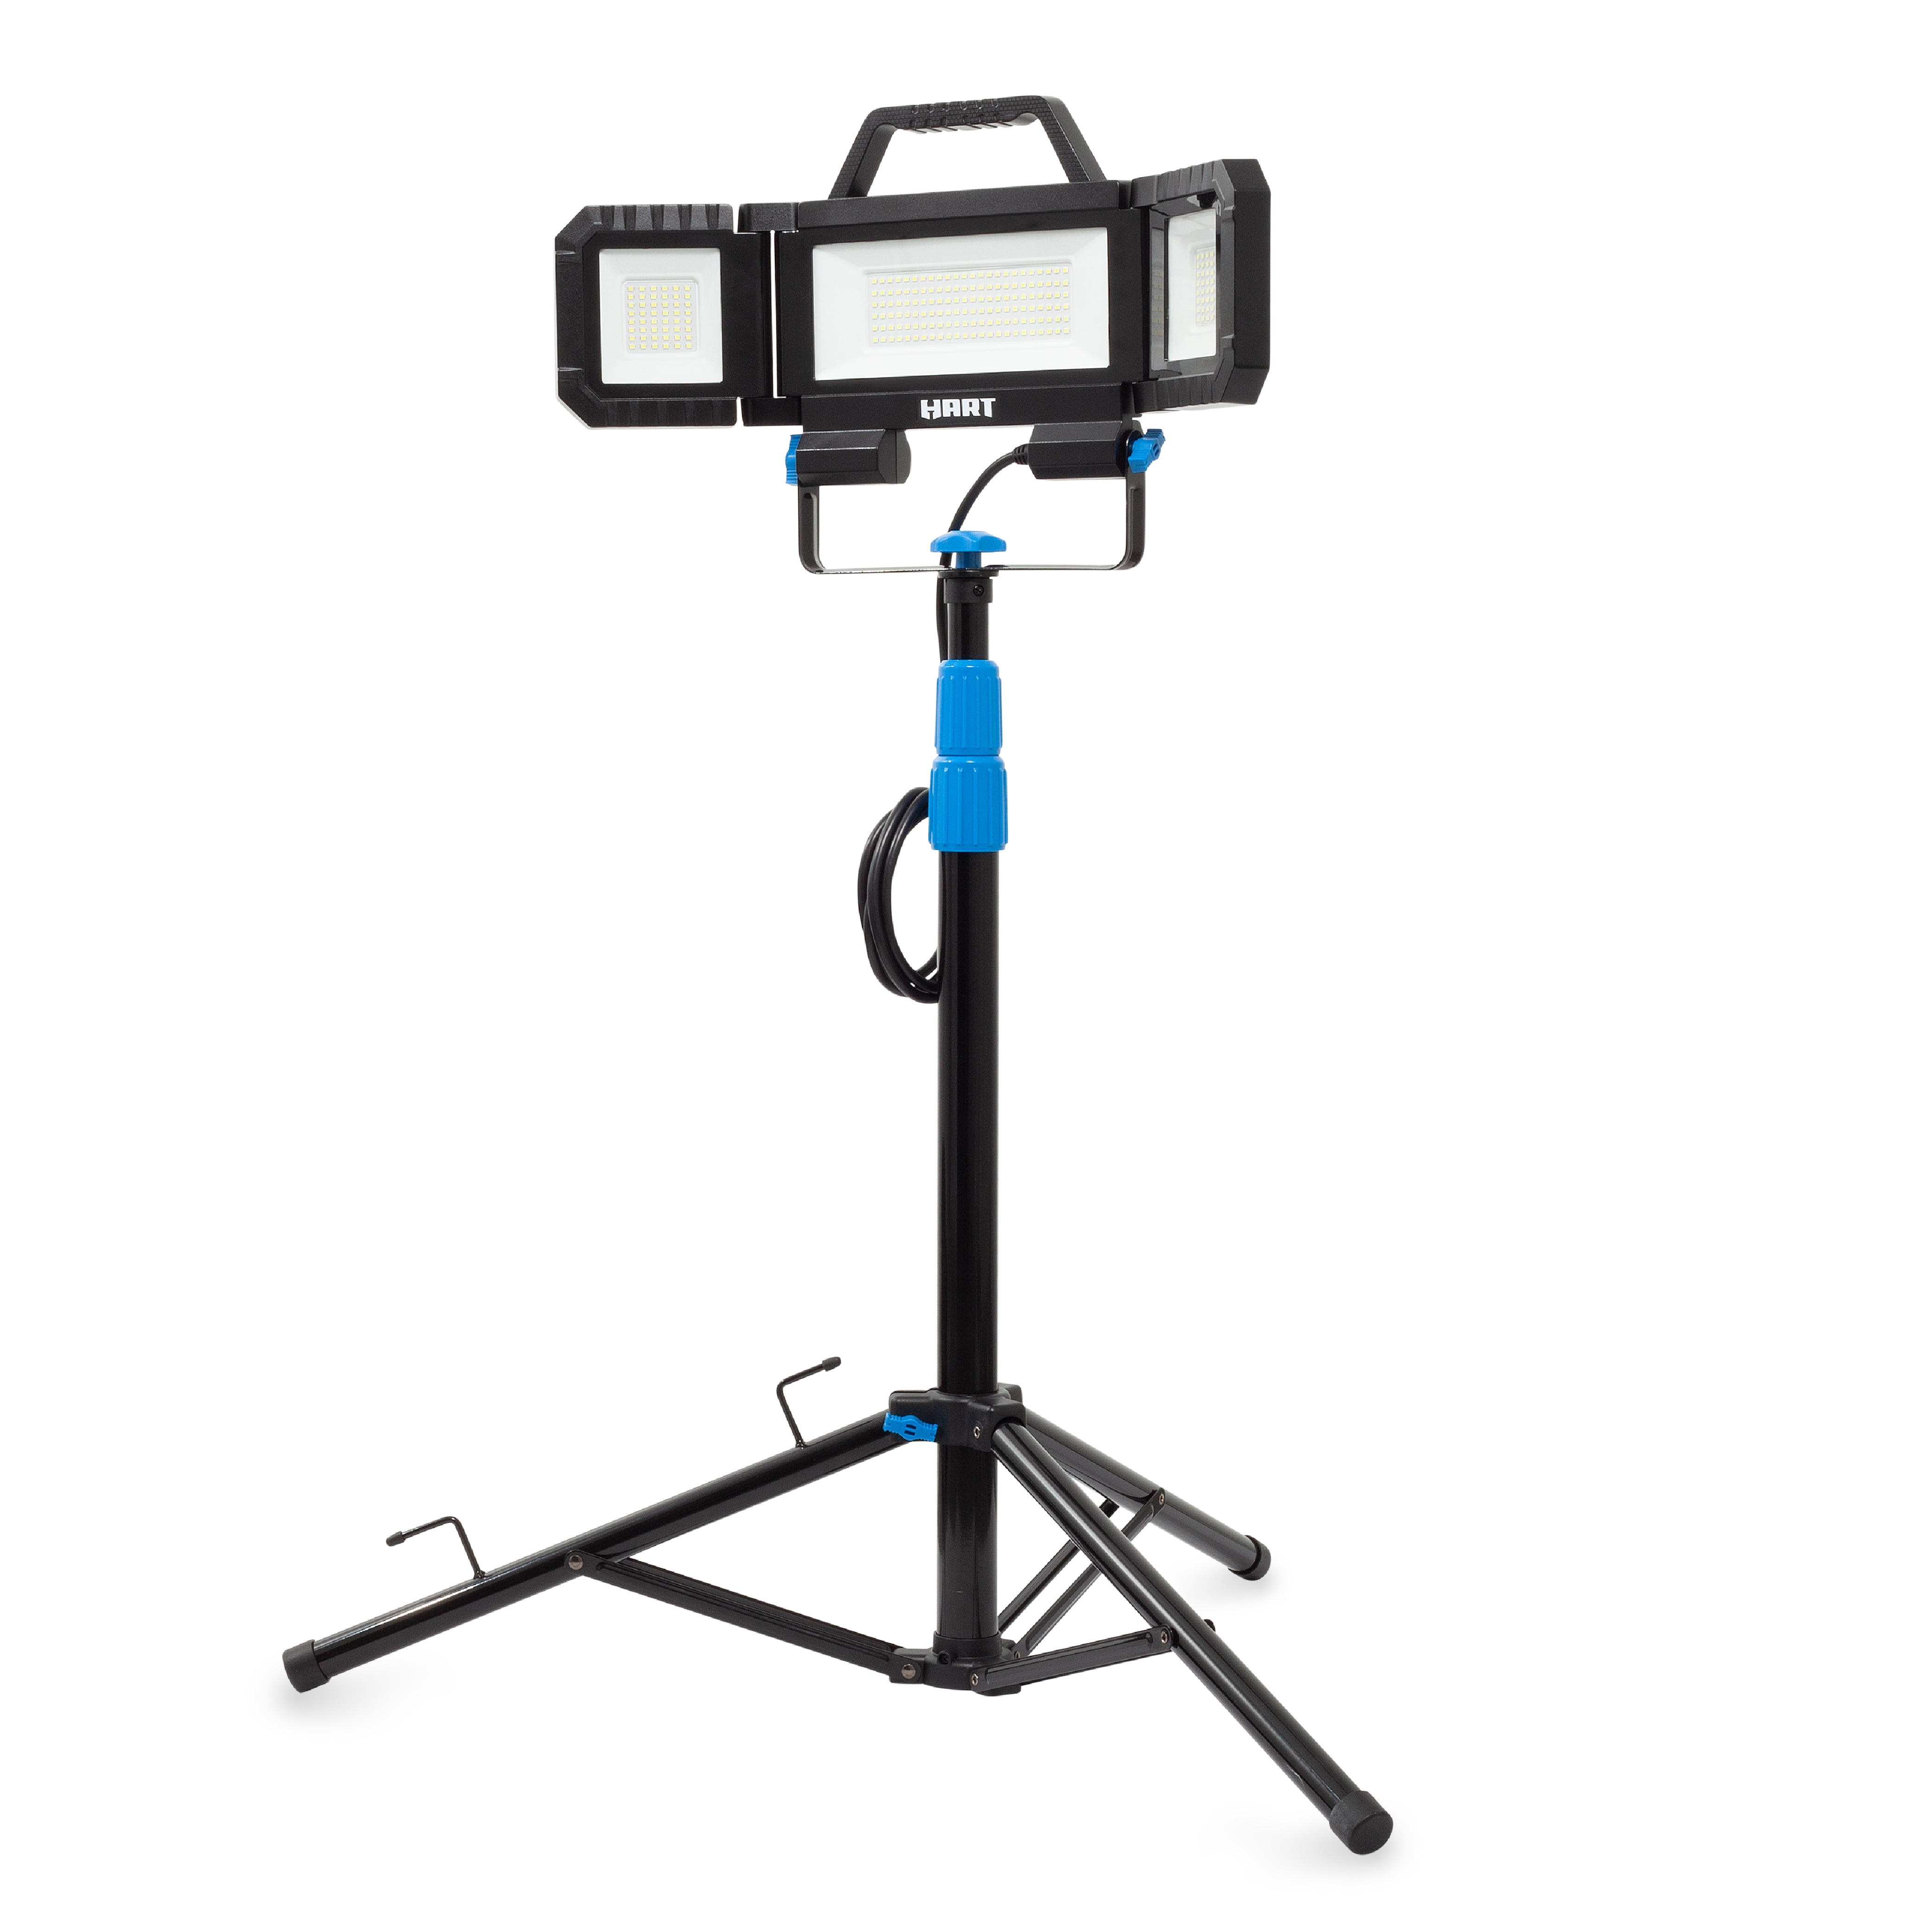 HART LED 3-Head Adjustable Plug-in Work Light with Tripod (7000 Lumens) $54 + Free Shipping